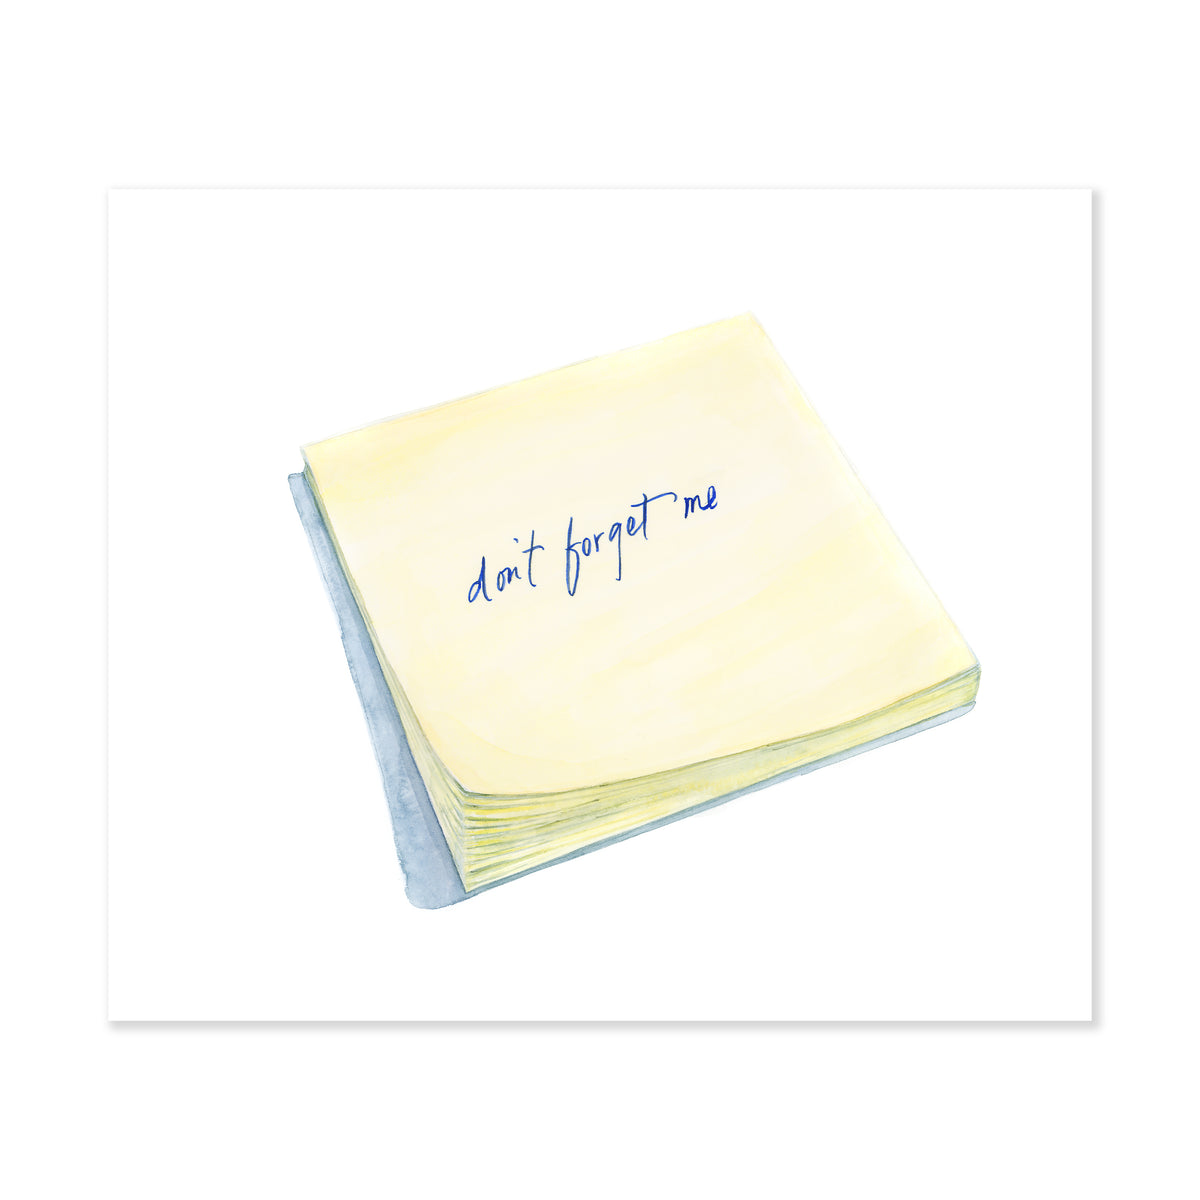 A fine art print illustrating a pad of yellow sticky notes featuring text that reads don't forget me in blue script painted in watercolors on a soft white background